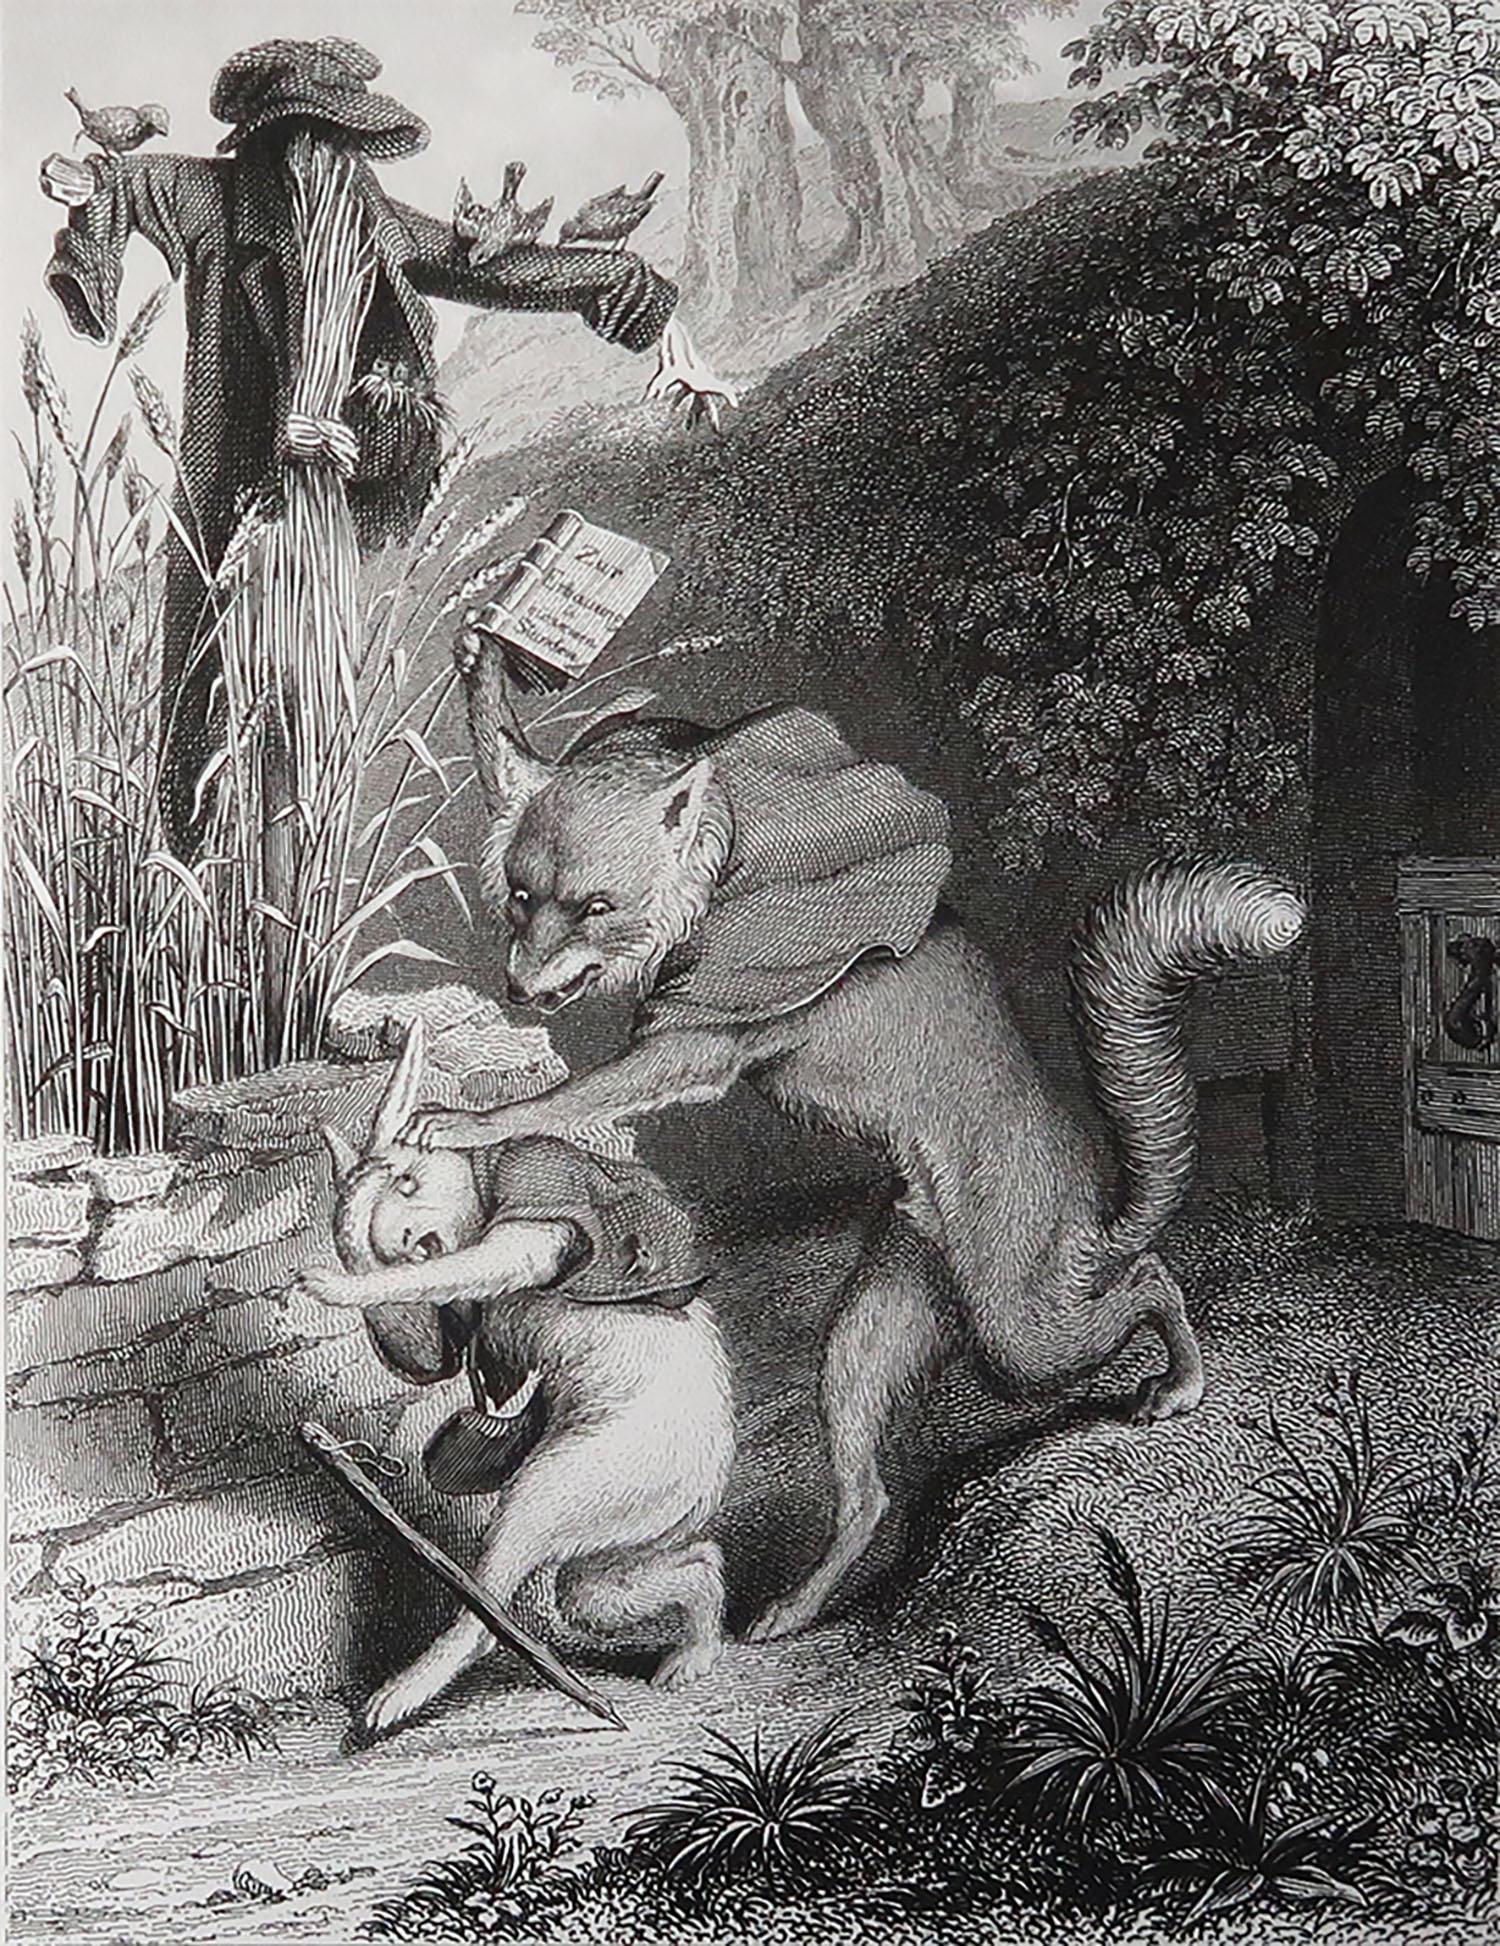 Great image by Heinrich Leutemann

From the Reynard The Fox series

Fine steel engraving

Published by A.H. Payne C.1850

Unframed.

